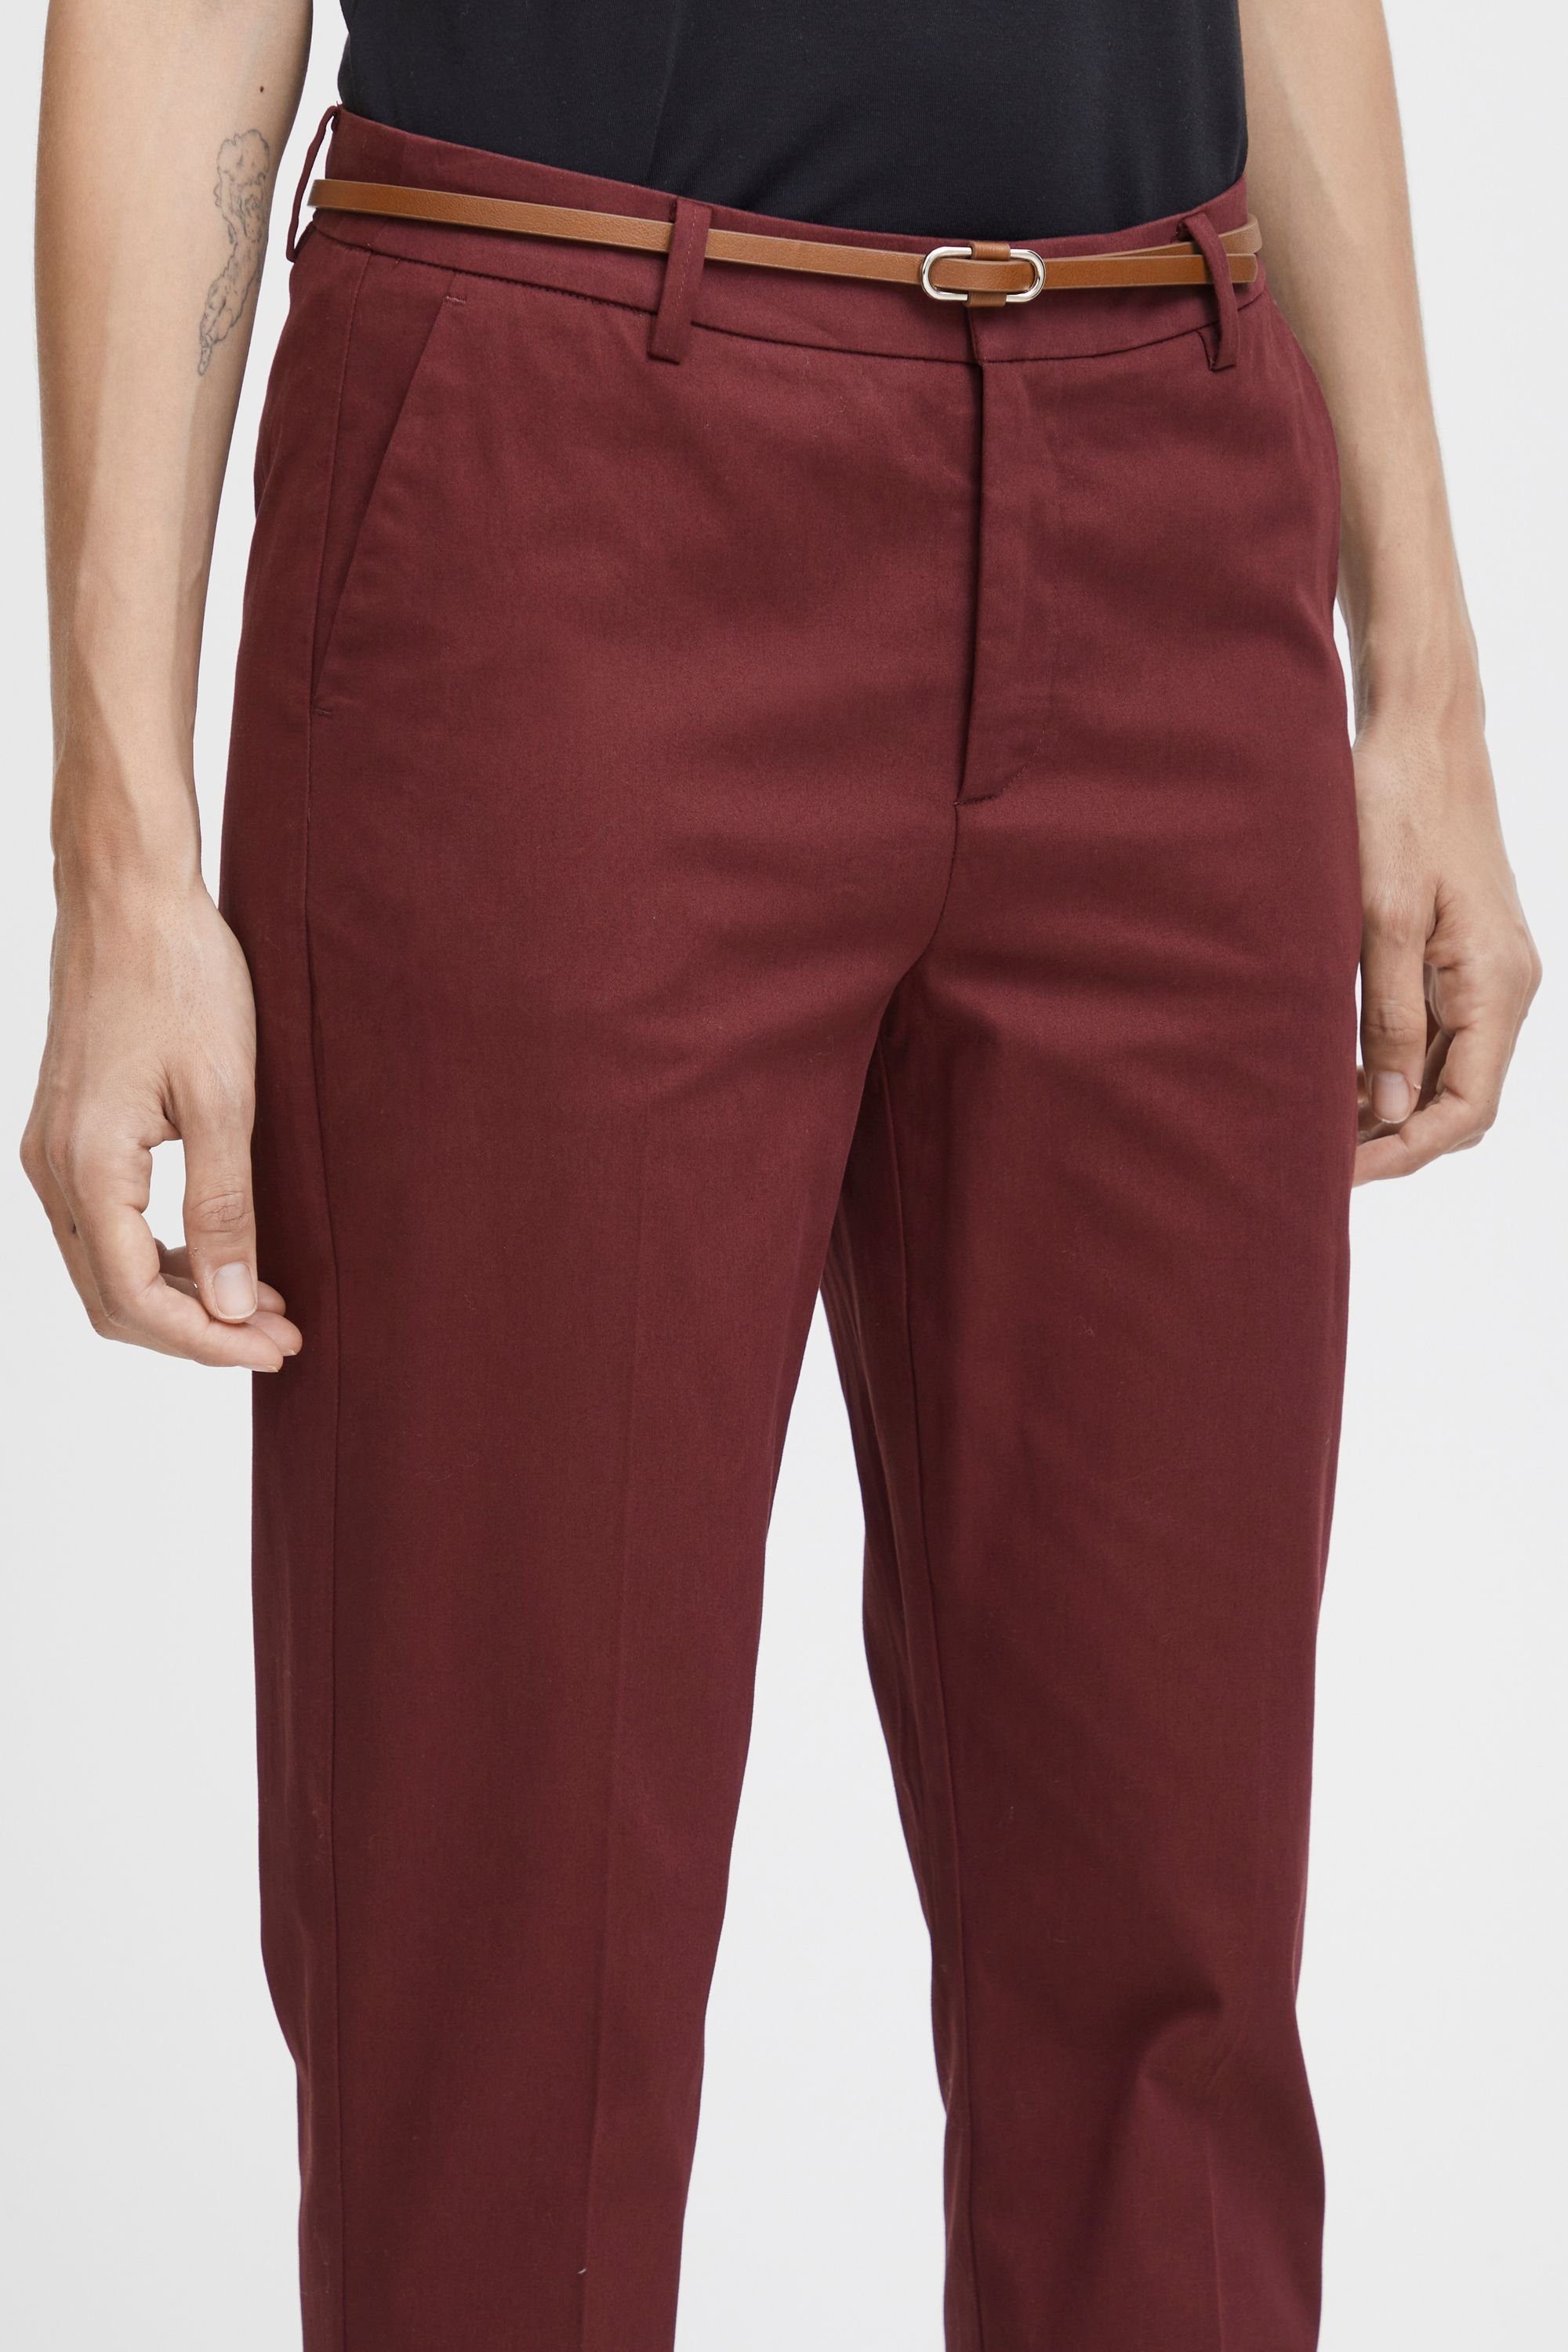 cigaret Chinohose Lange (191627) BYDays Chinostyle Hose coolen - 20803473 pants Royale 2 im b.young Port